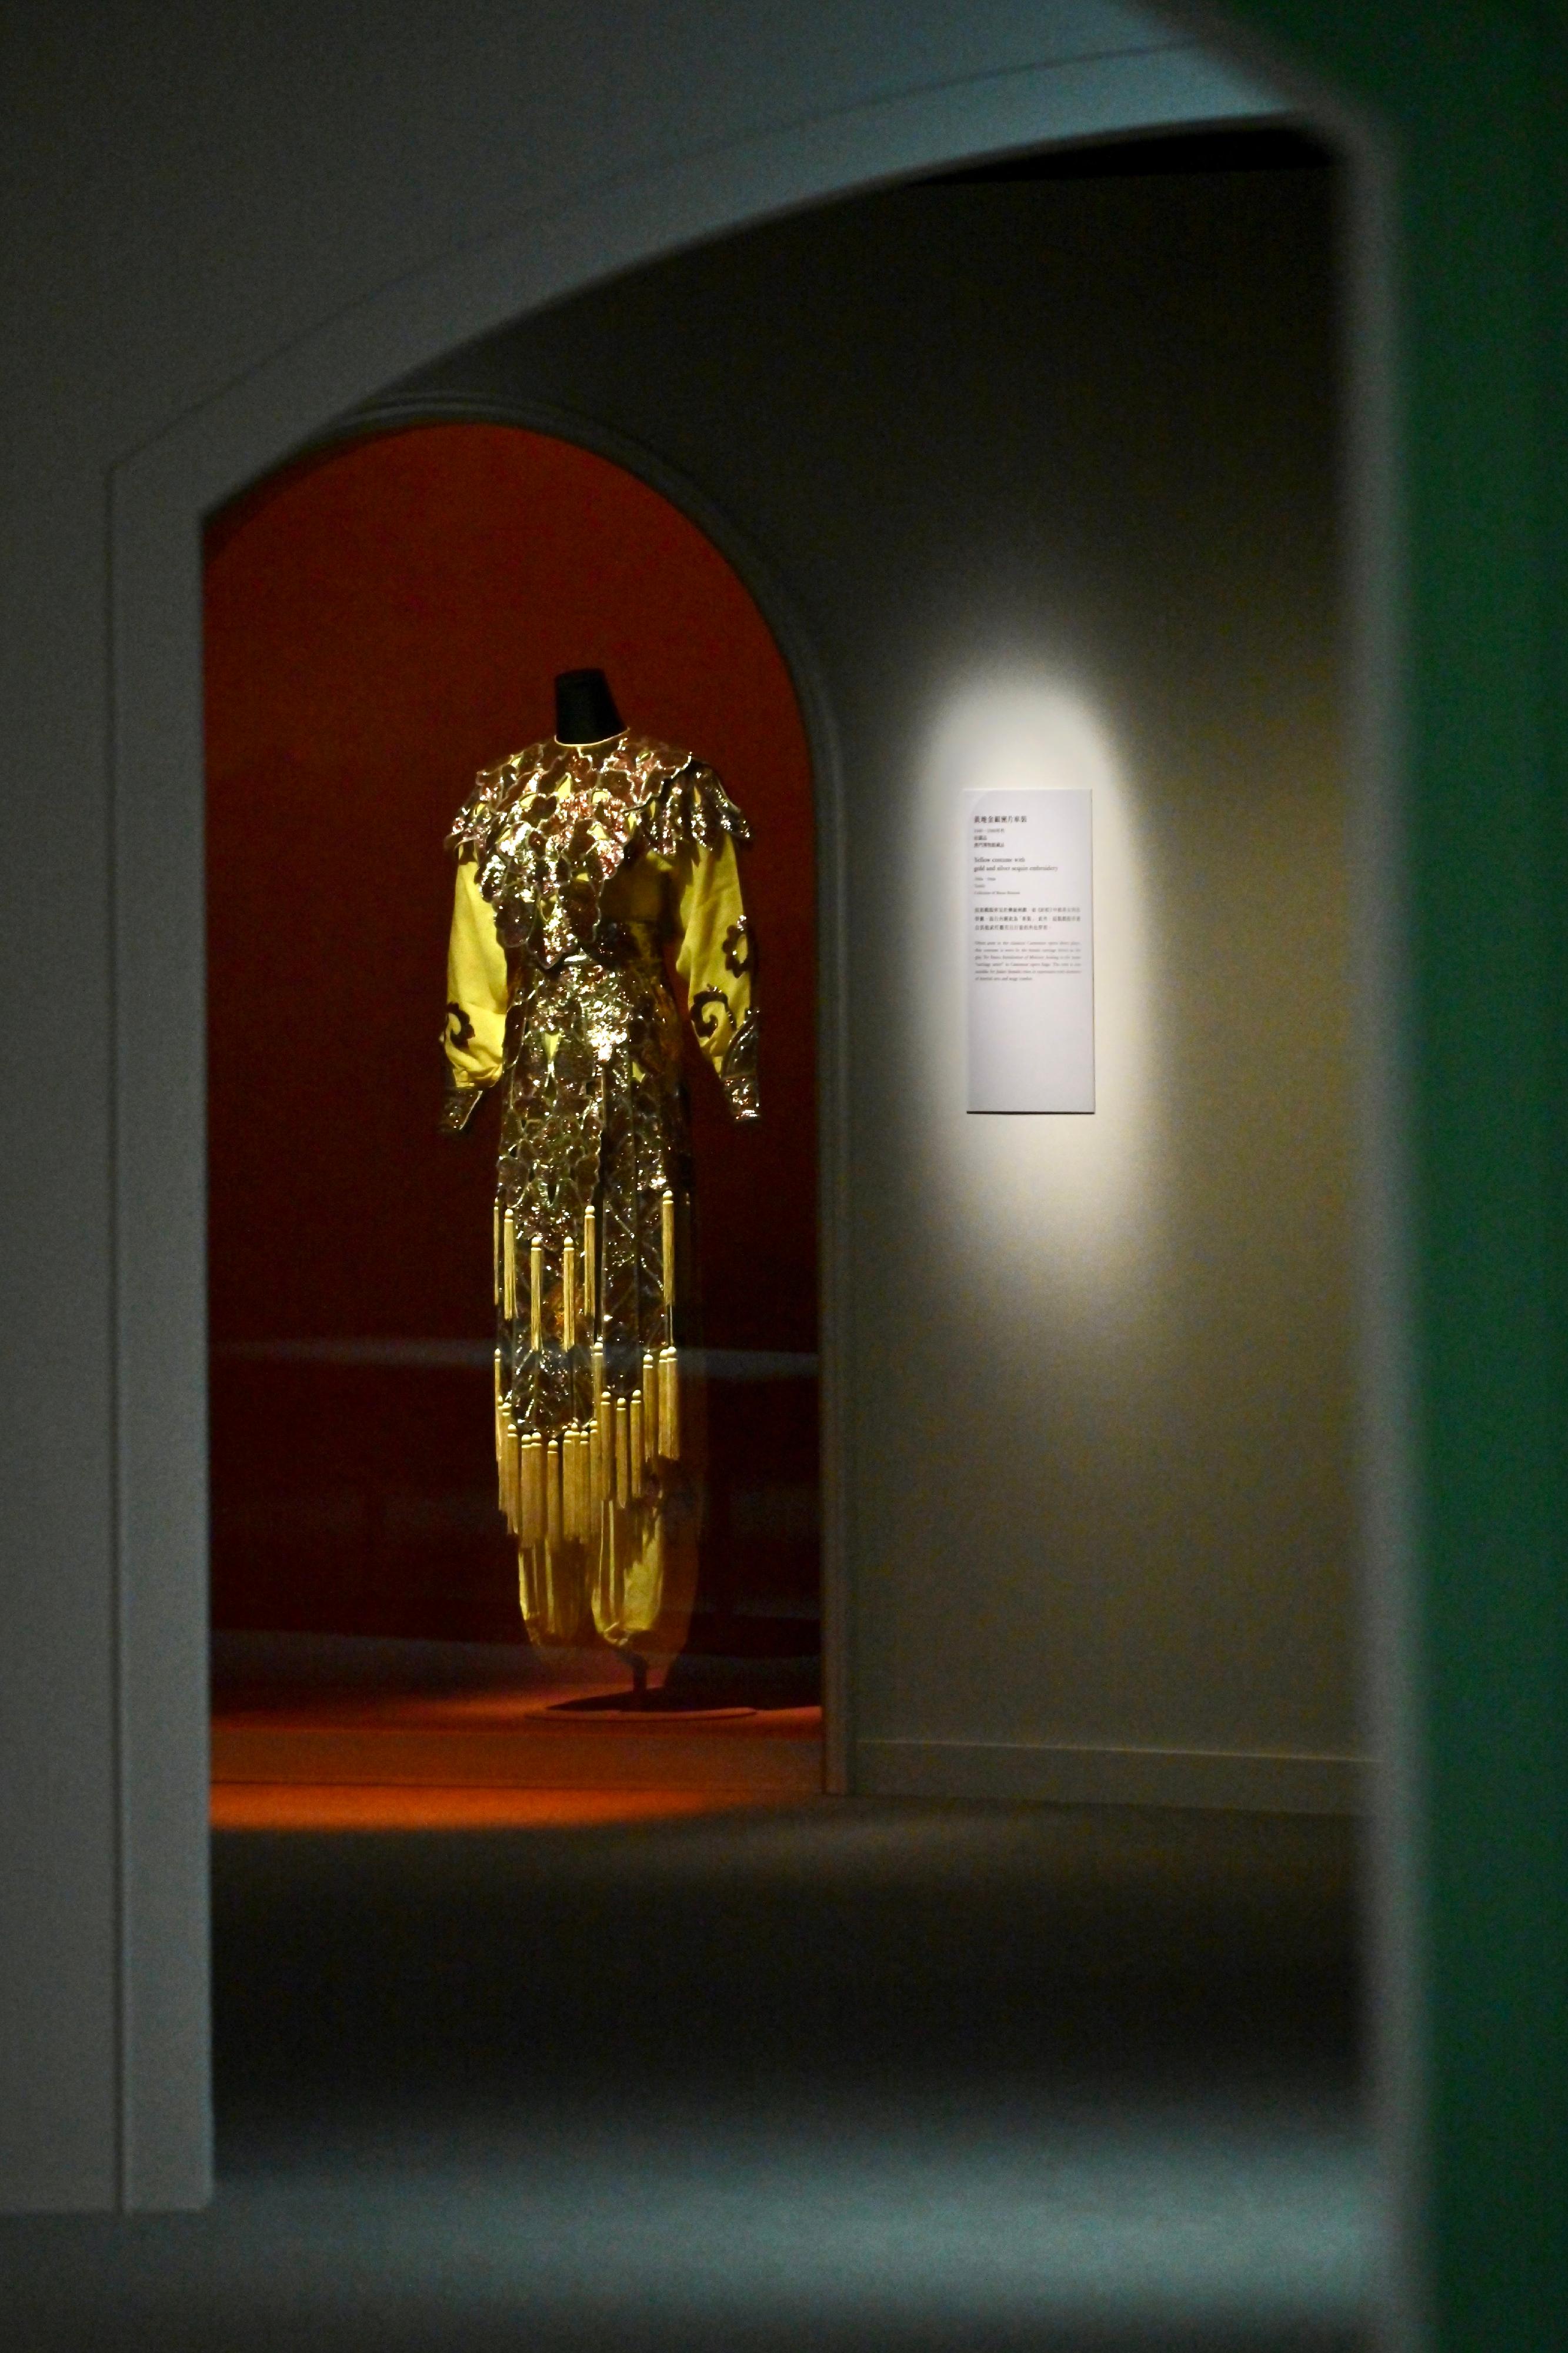 The opening ceremony of the Hong Kong stop of the touring exhibition "A Tale of Three Cities: Guangdong-Hong Kong-Macao Greater Bay Area and Export of Silk Products in the Ming and Qing Dynasties" was held today (September 7) at the Hong Kong Museum of Art. Picture shows a yellow costume with gold and silver sequin embroidery dating from the 1940s to 1960s. (Collection of Macao Museum)